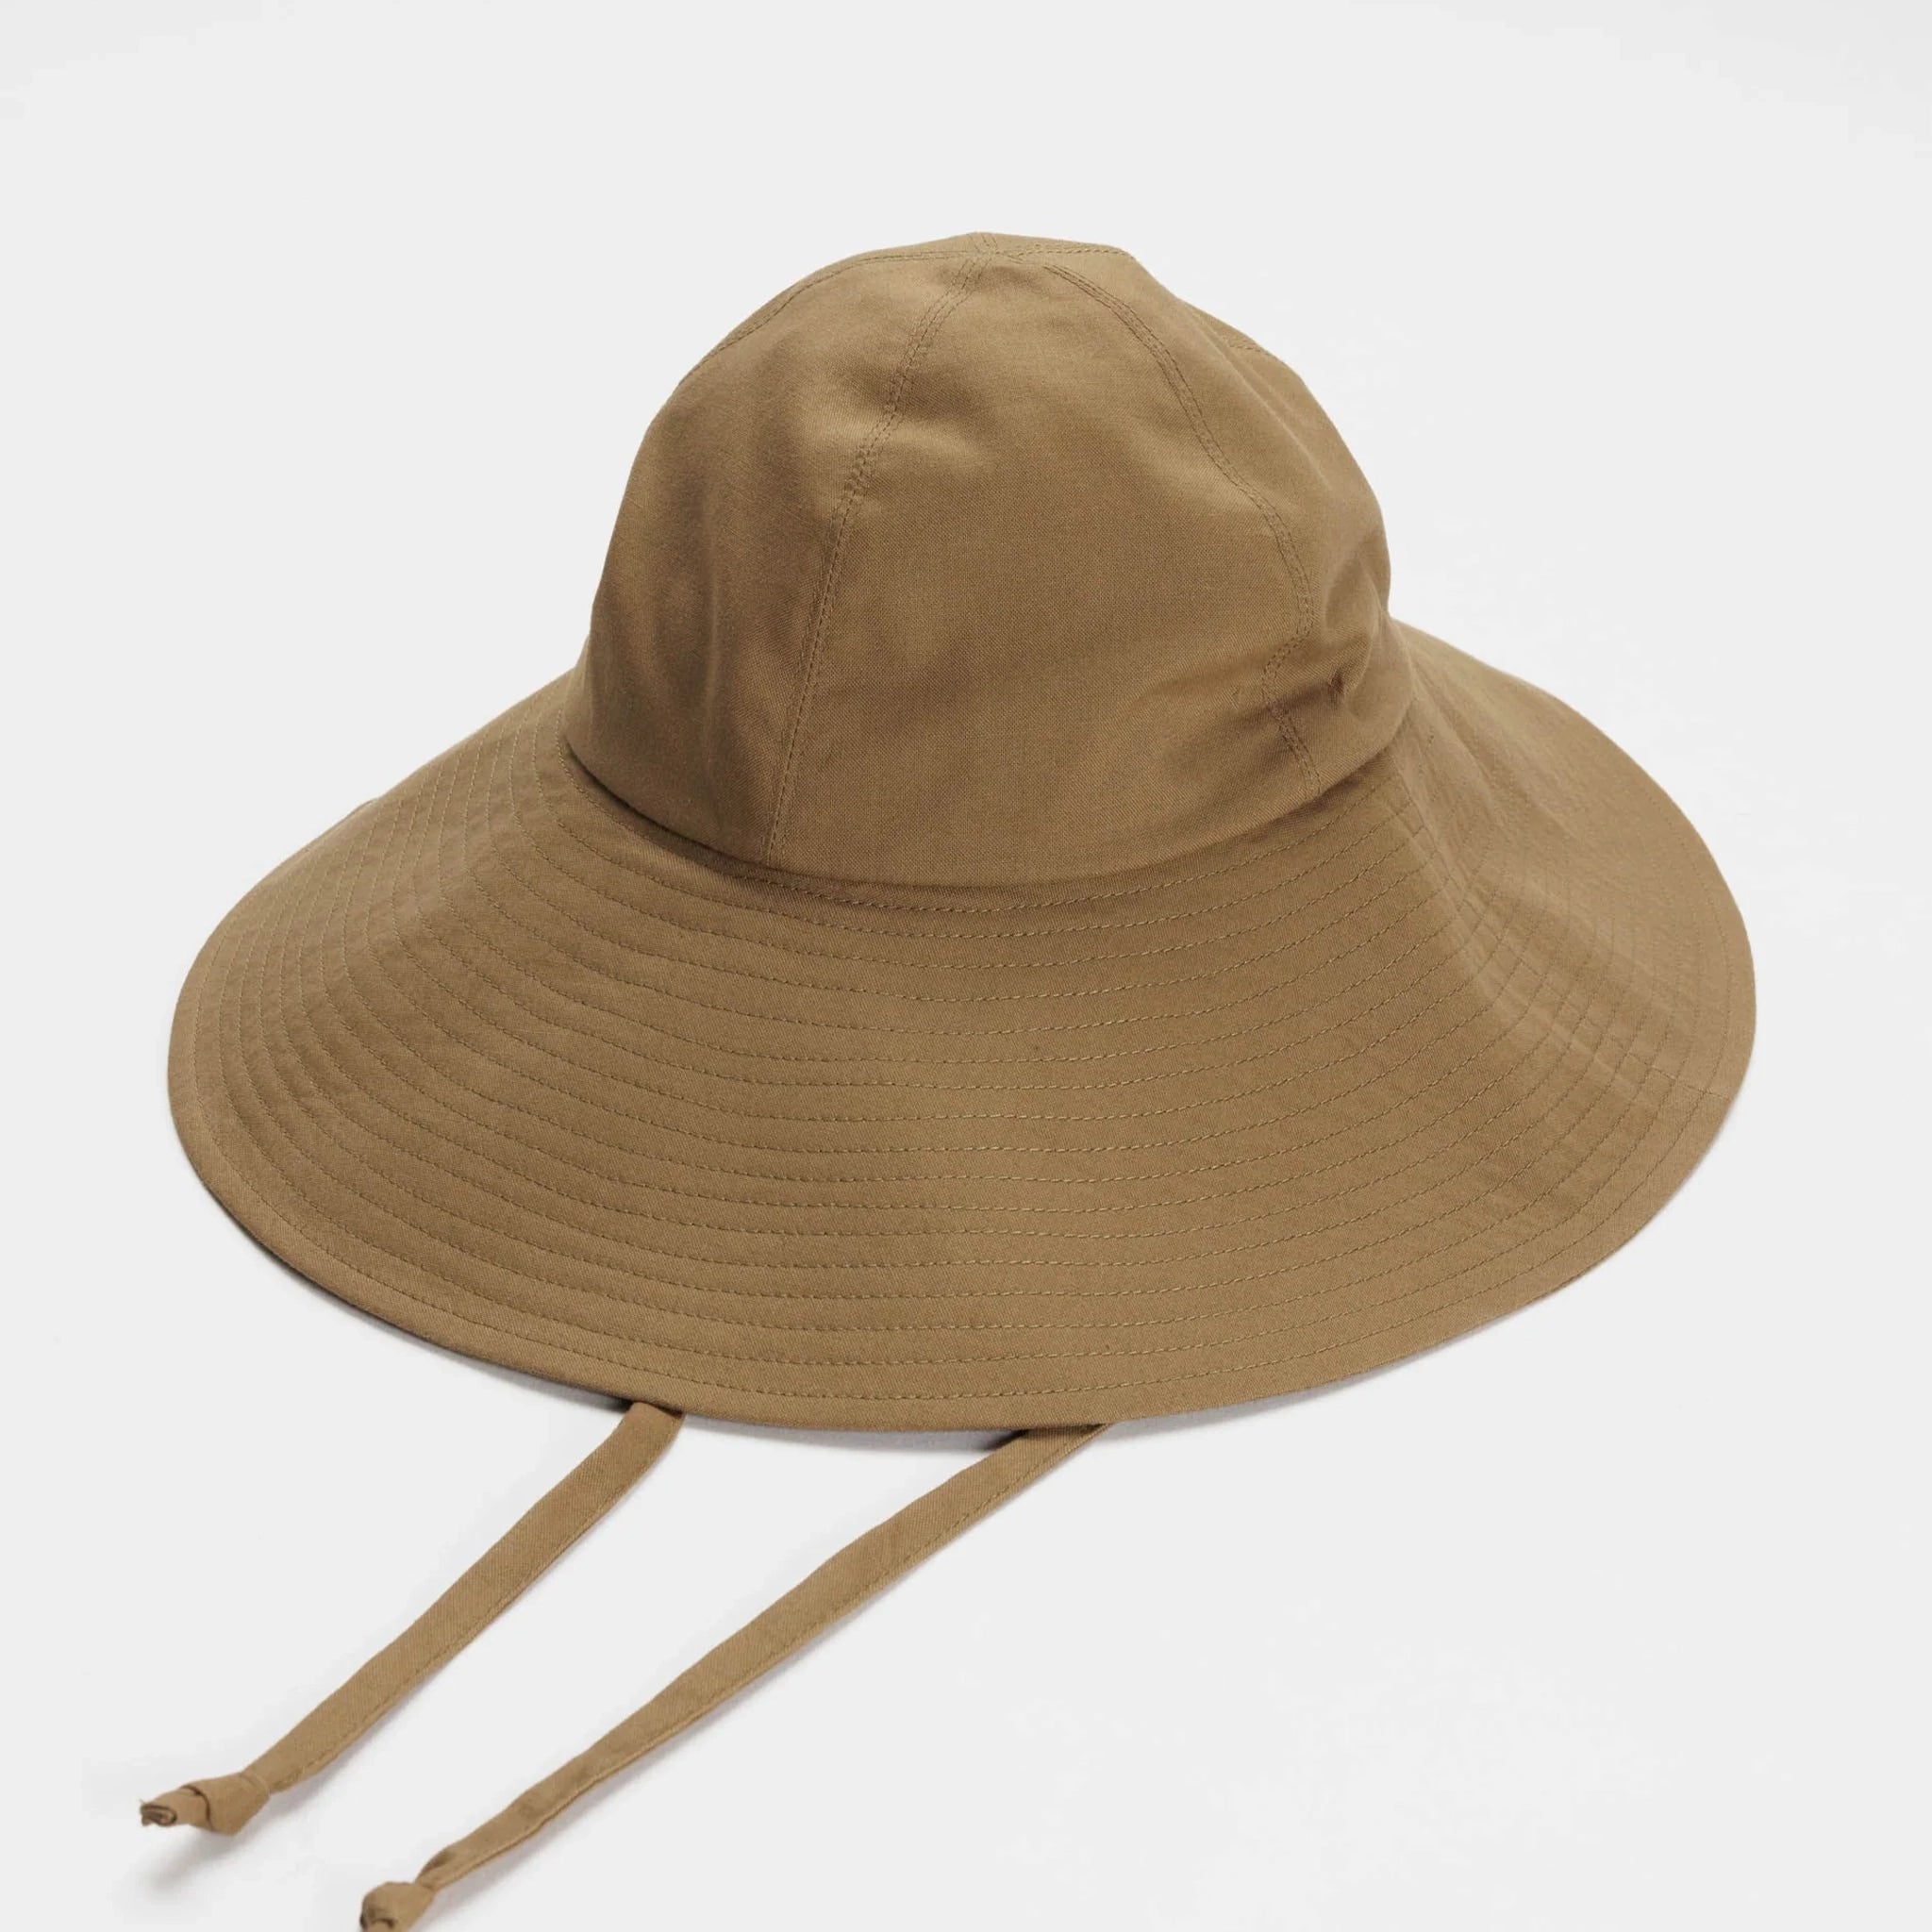 On a white background is a flexible sun hat in a brown shad with a wide brim and two straps for securing around the neck.